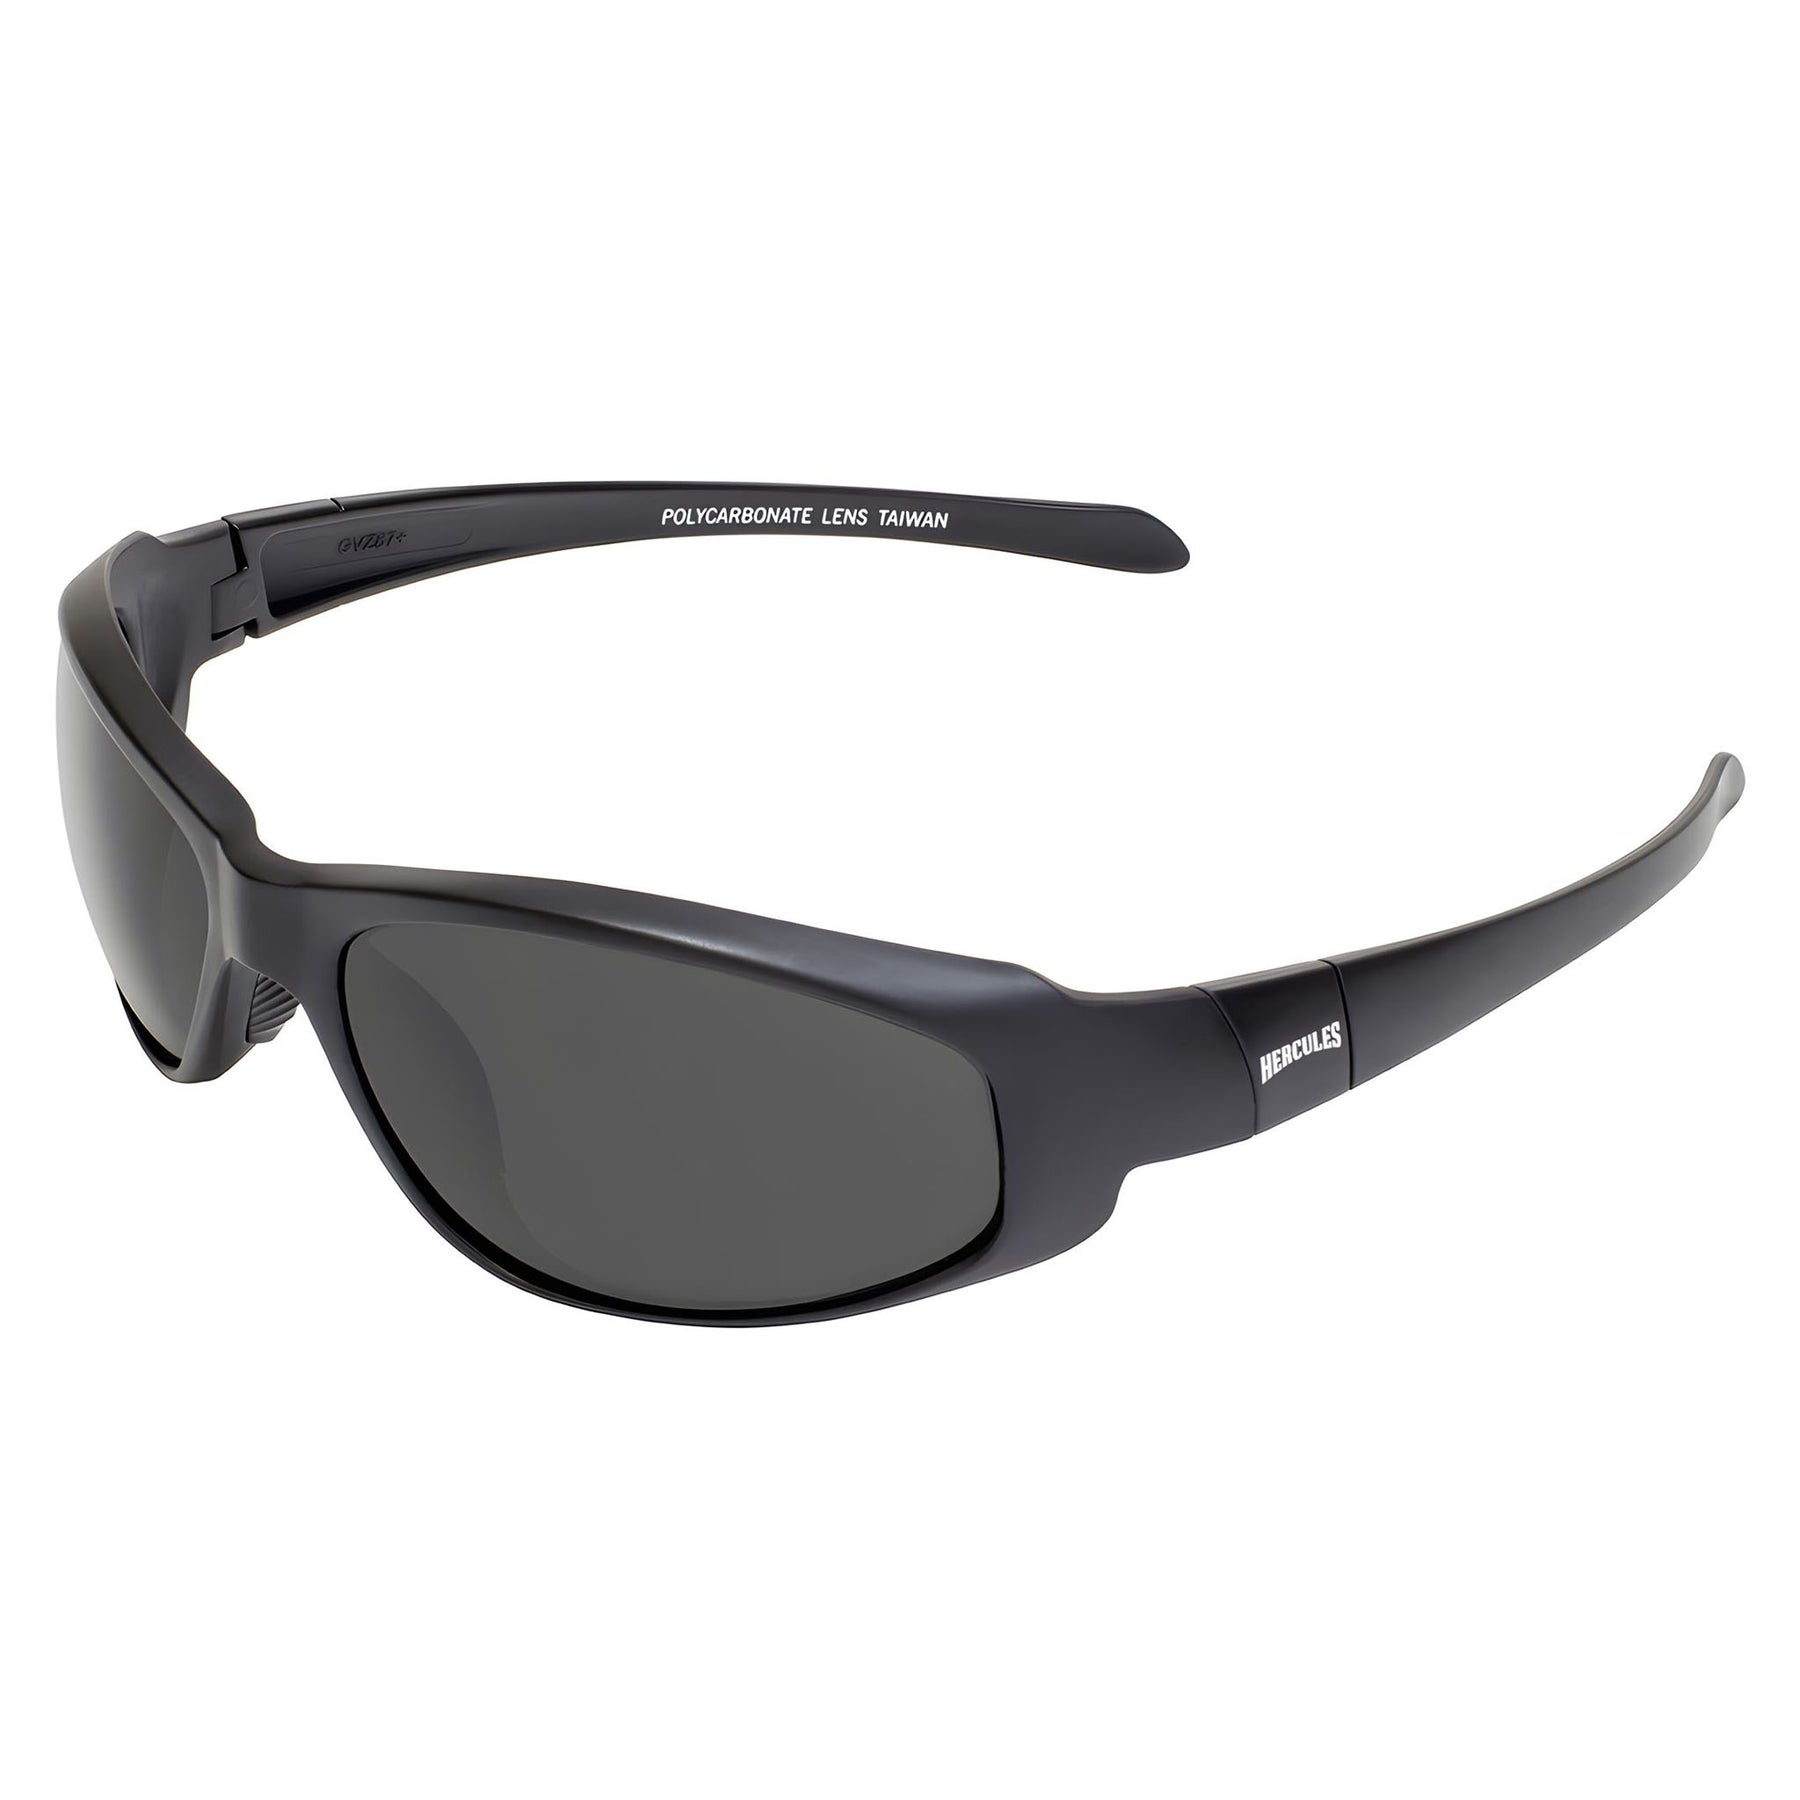 Hercules 2 Safety Glasses